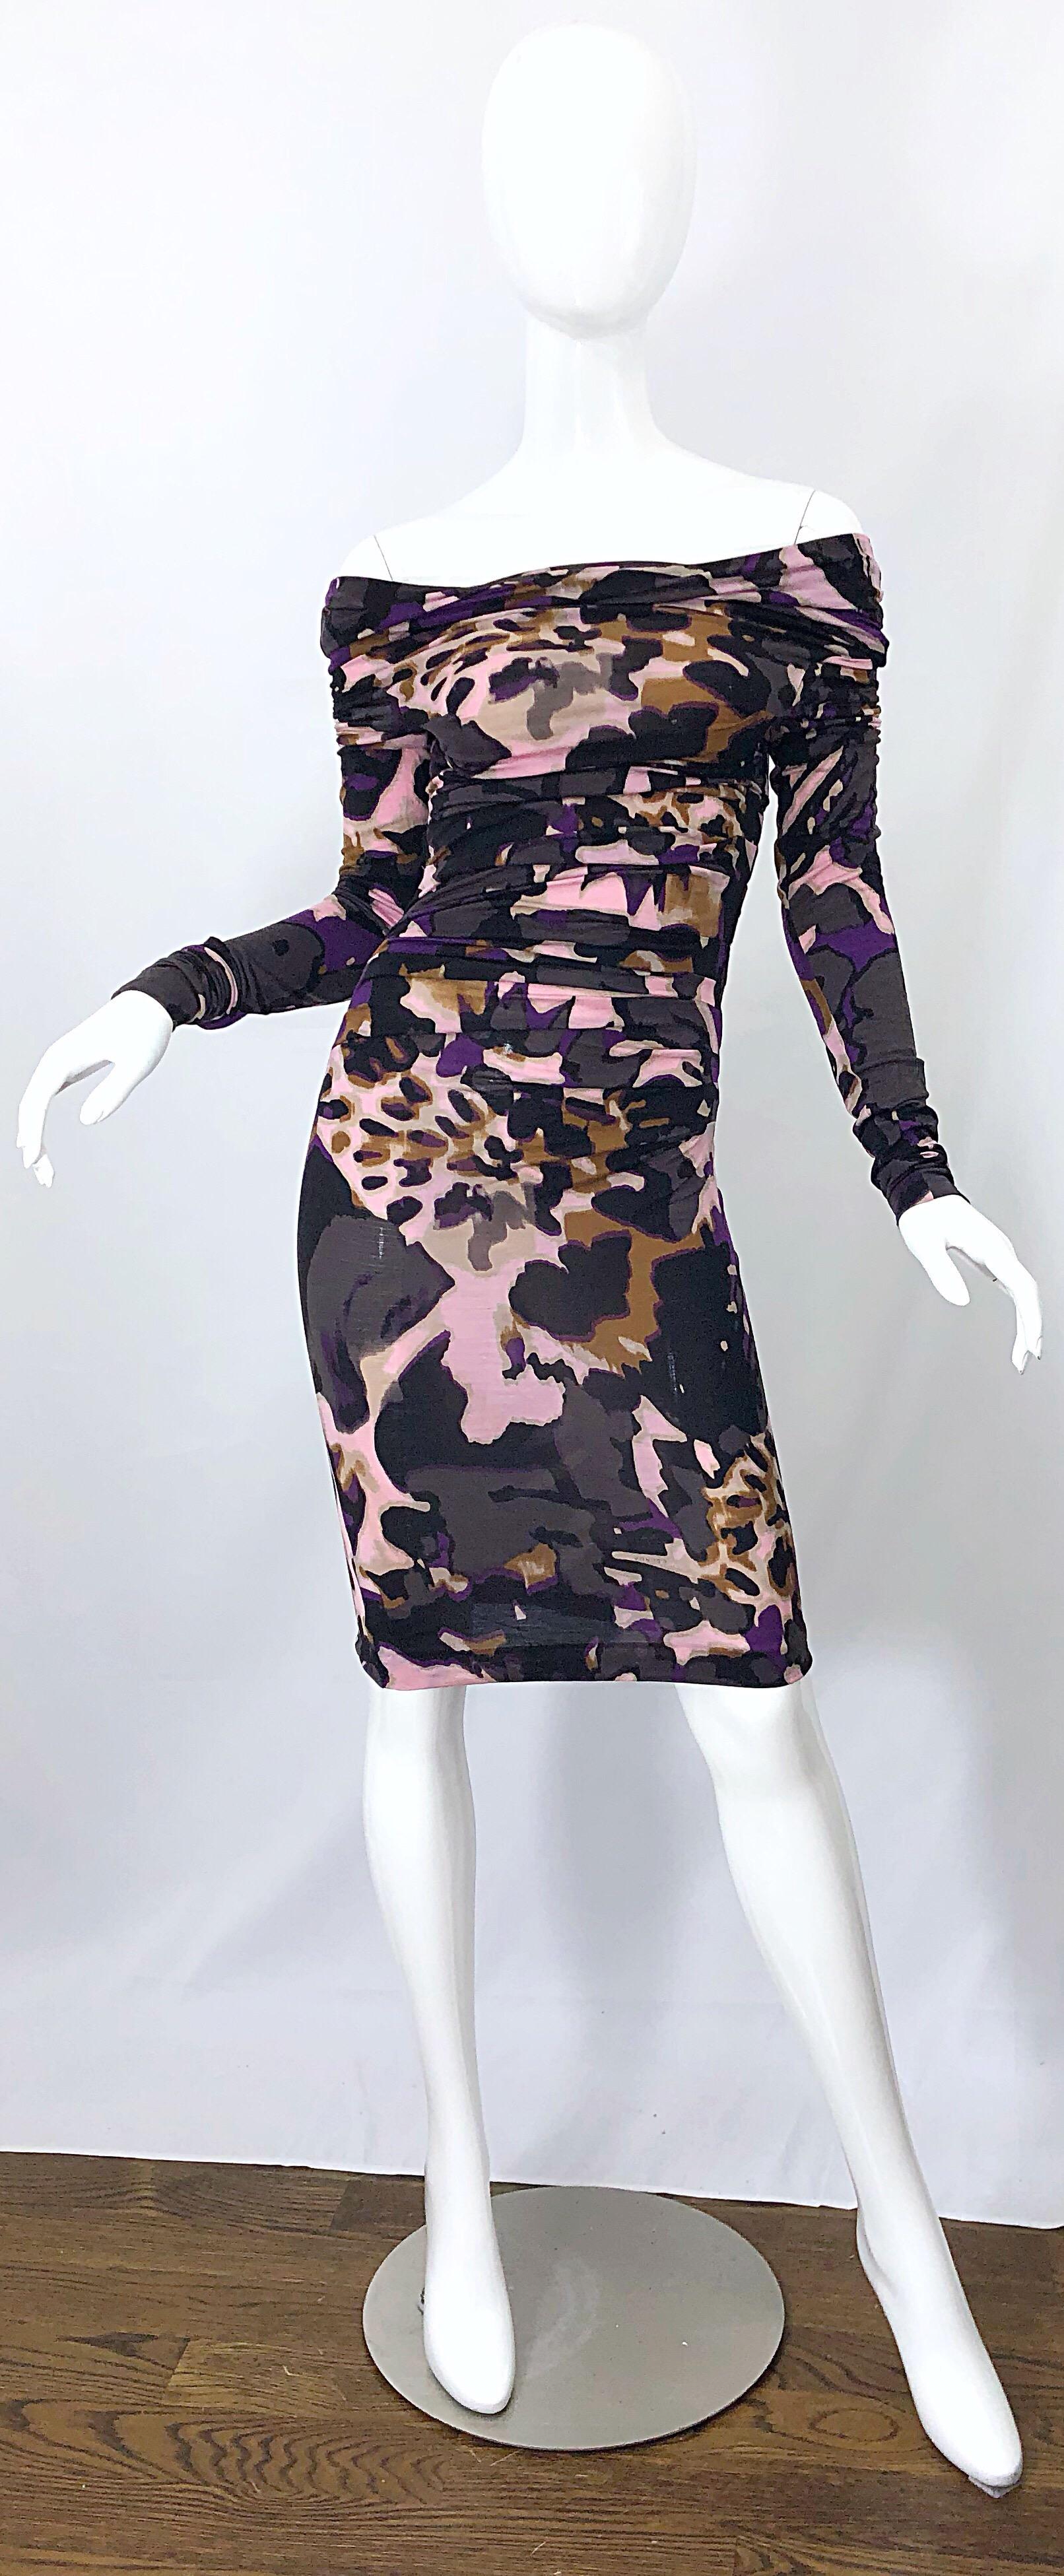 Incredible new ESCADA lightweight wool off-the-shoulder mixed animal print dress! Vibrant colors of purple, pink, gray, brown, rust and black throughout. Flattering ruching disguises any problem areas. The perfect lightweight fabric blends of wool